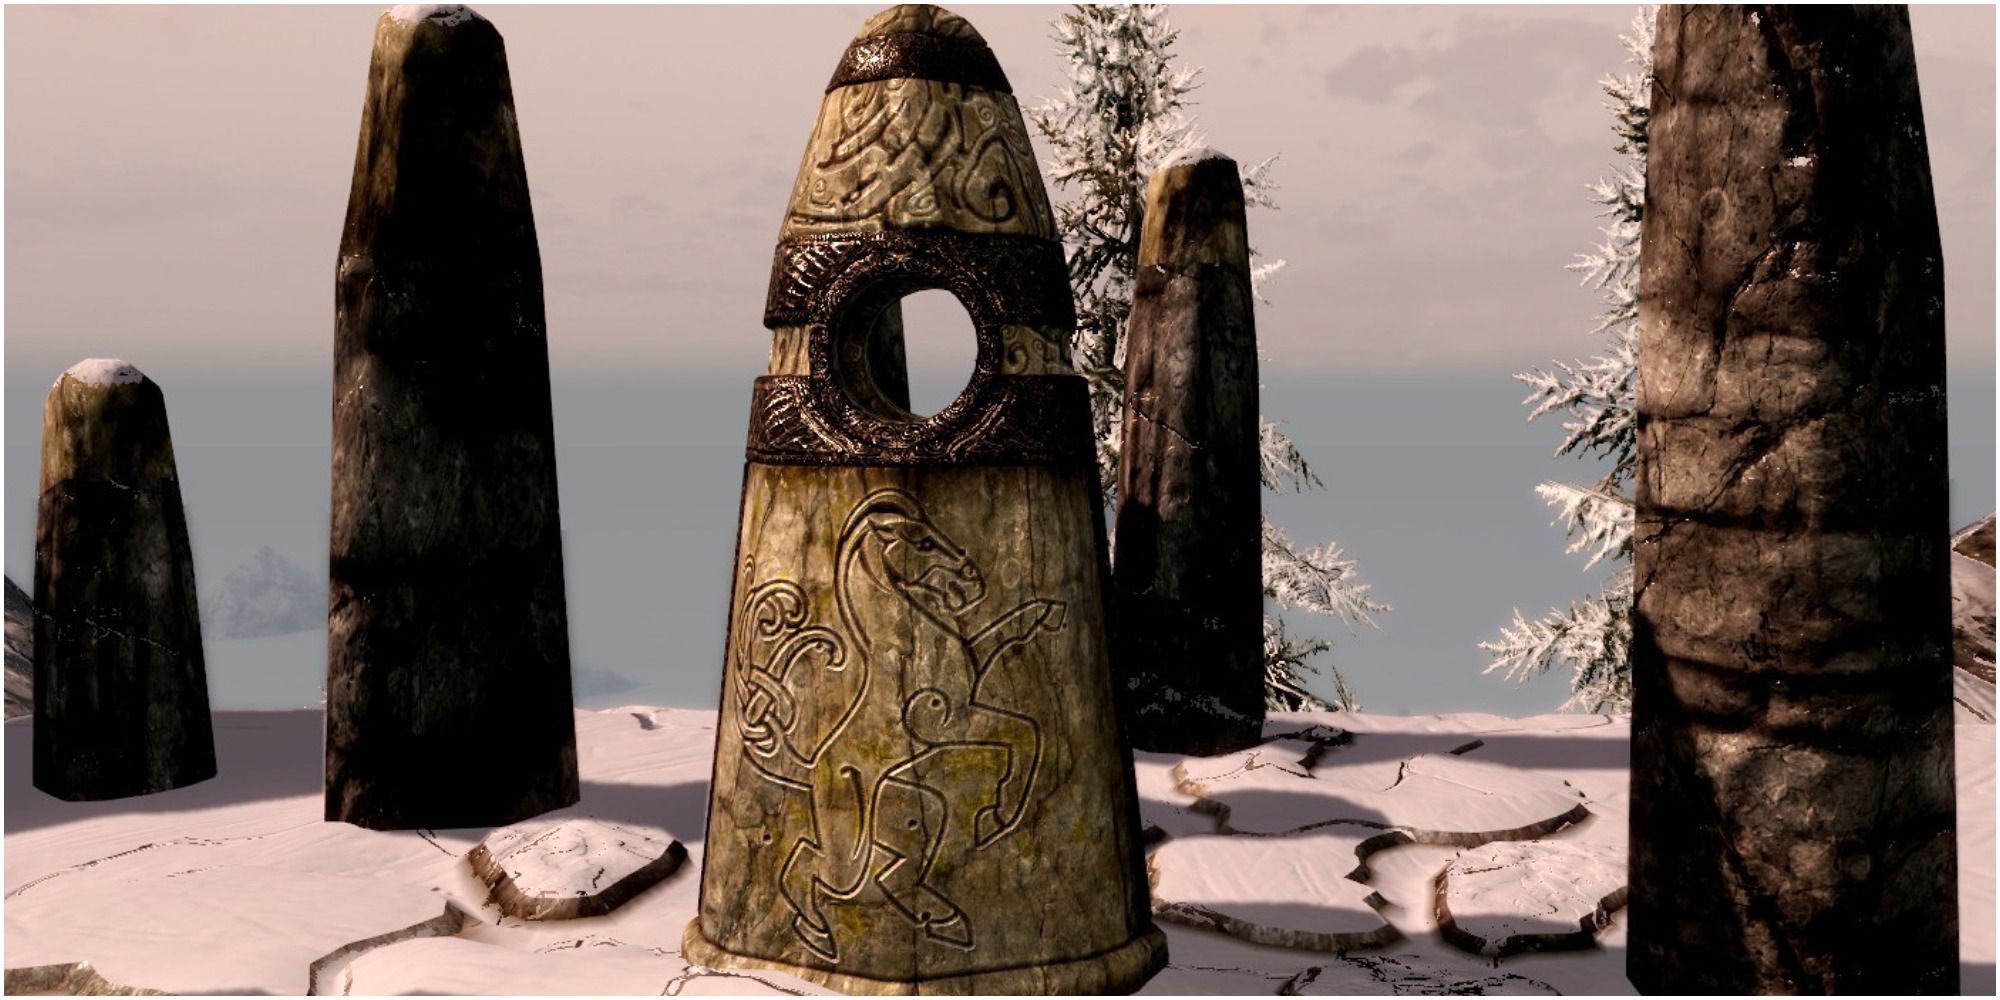 The Steed Standing Stone in Skyrim